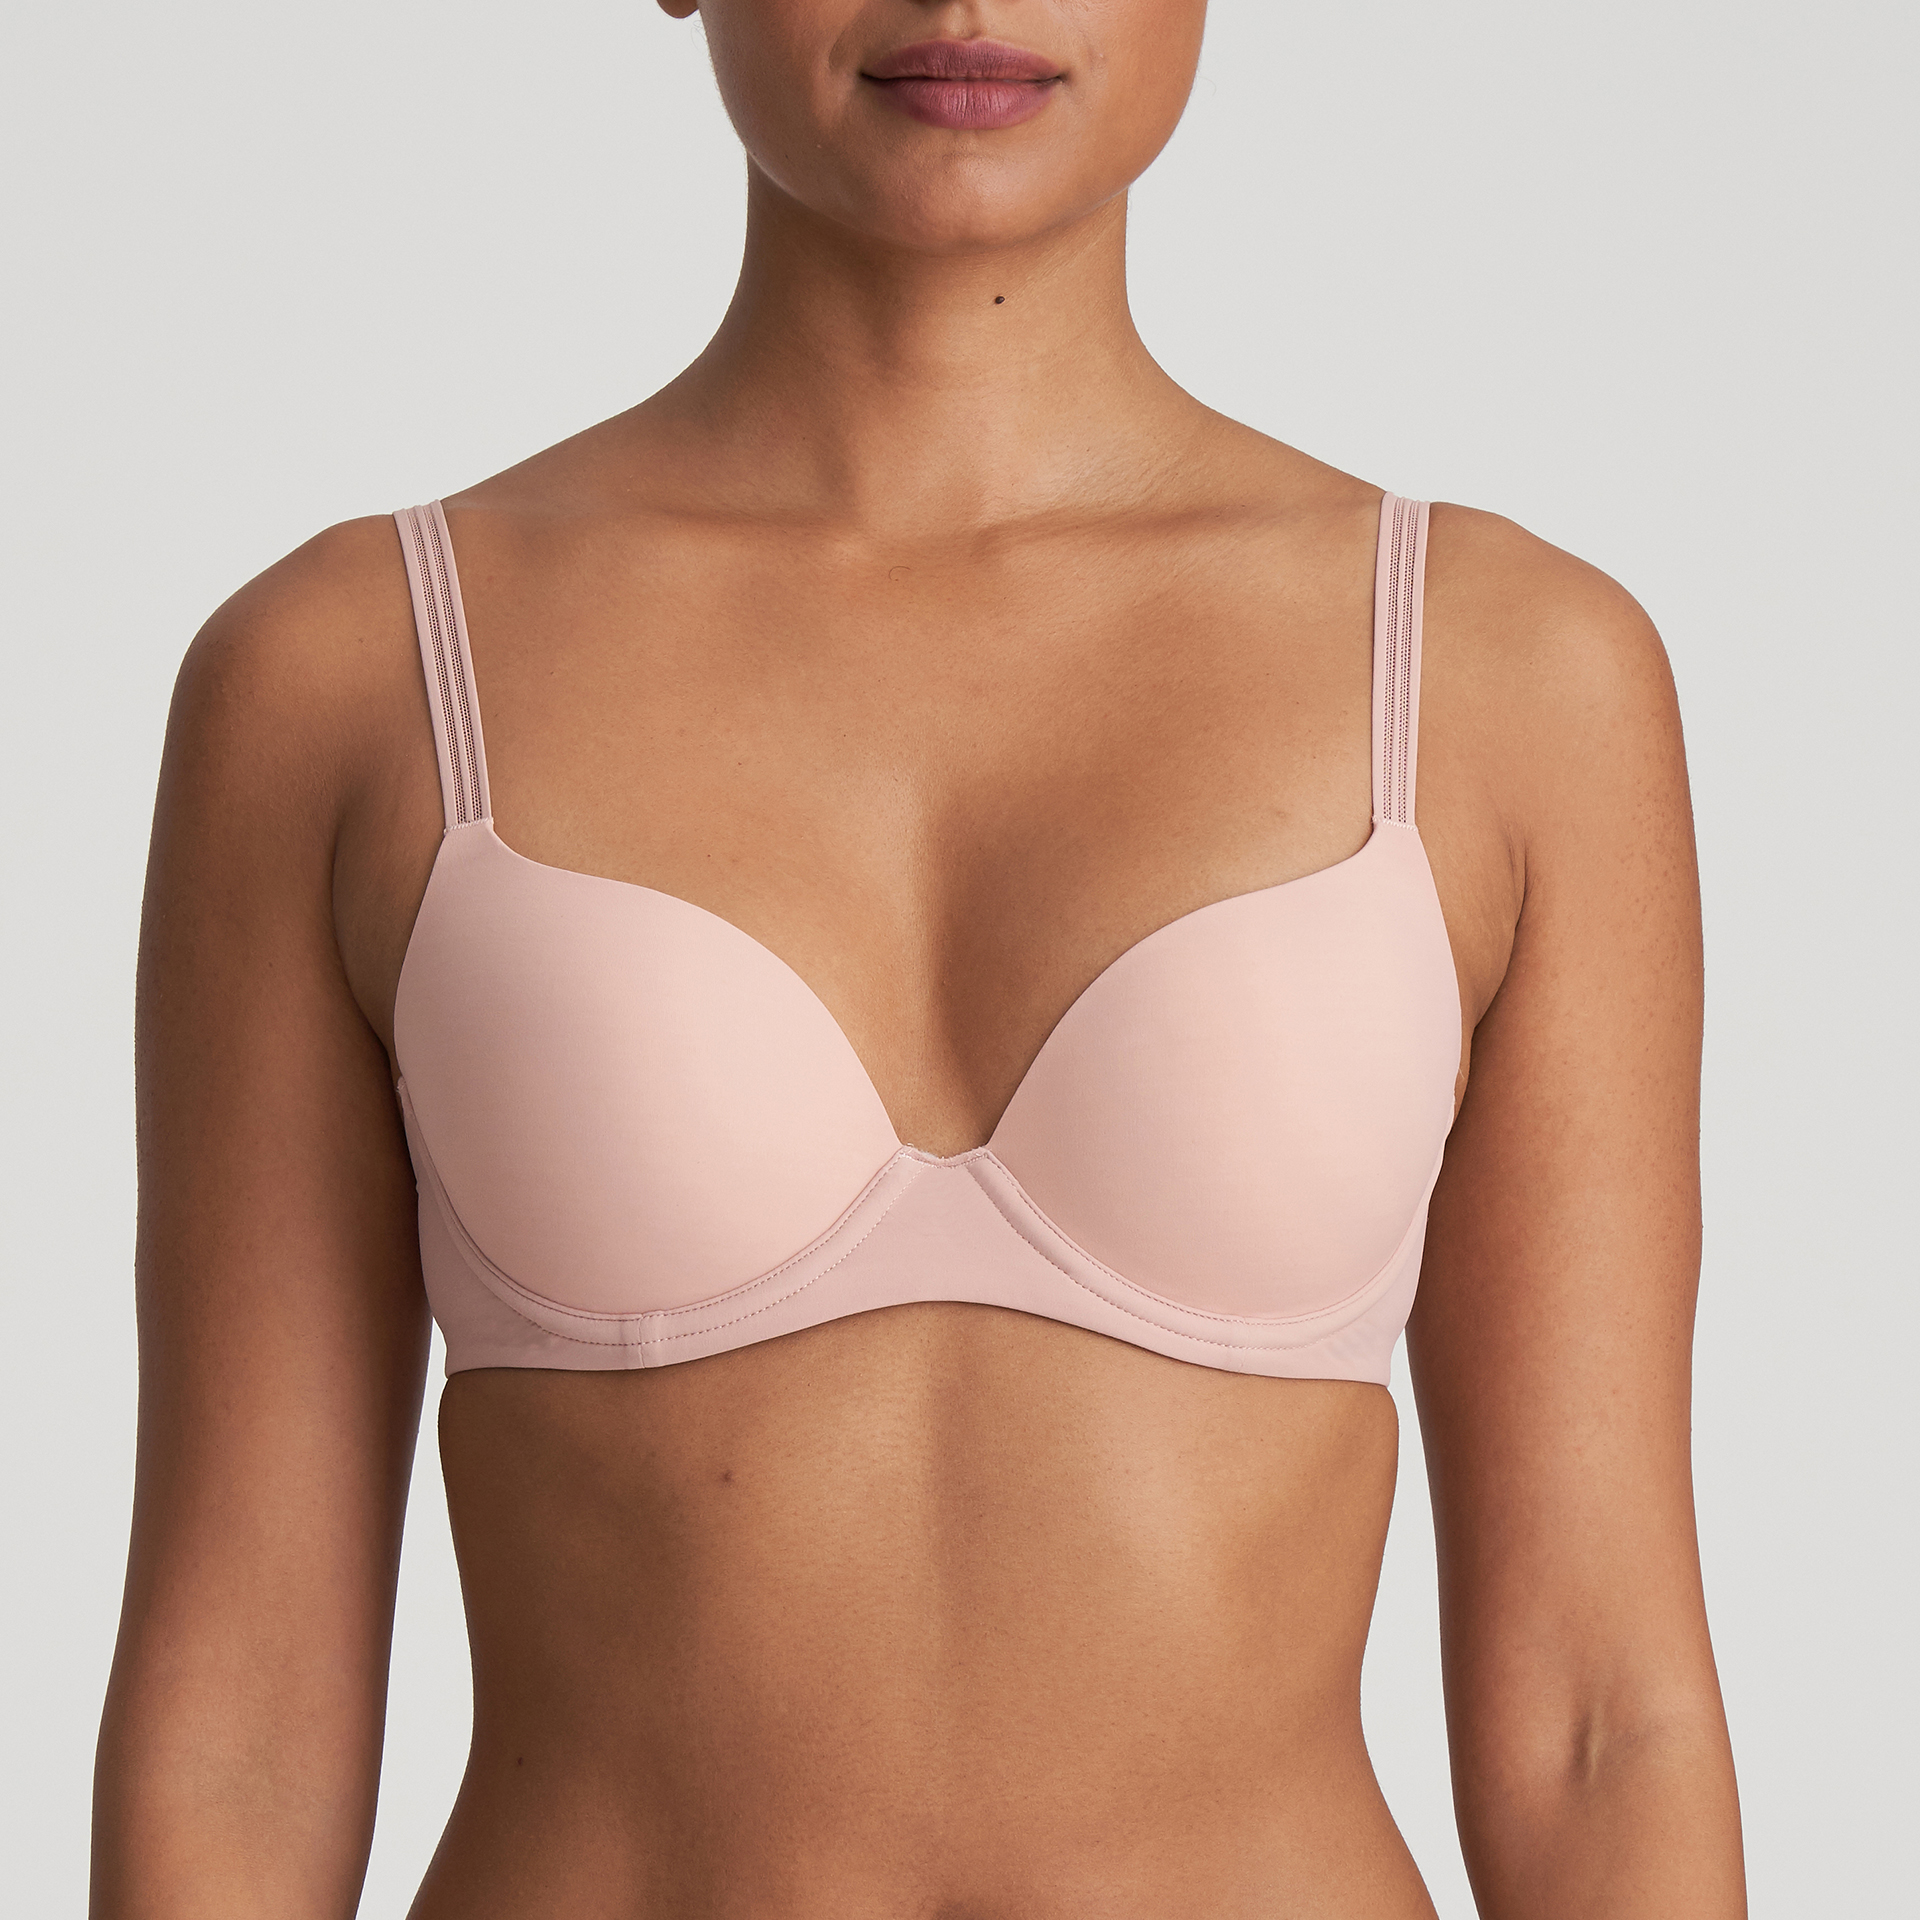 KOLO 8 News Now - Are you okay with padded bras showing up in young girl's  clothing sections at stores? This bra was found here locally in a section  or clothes targeted